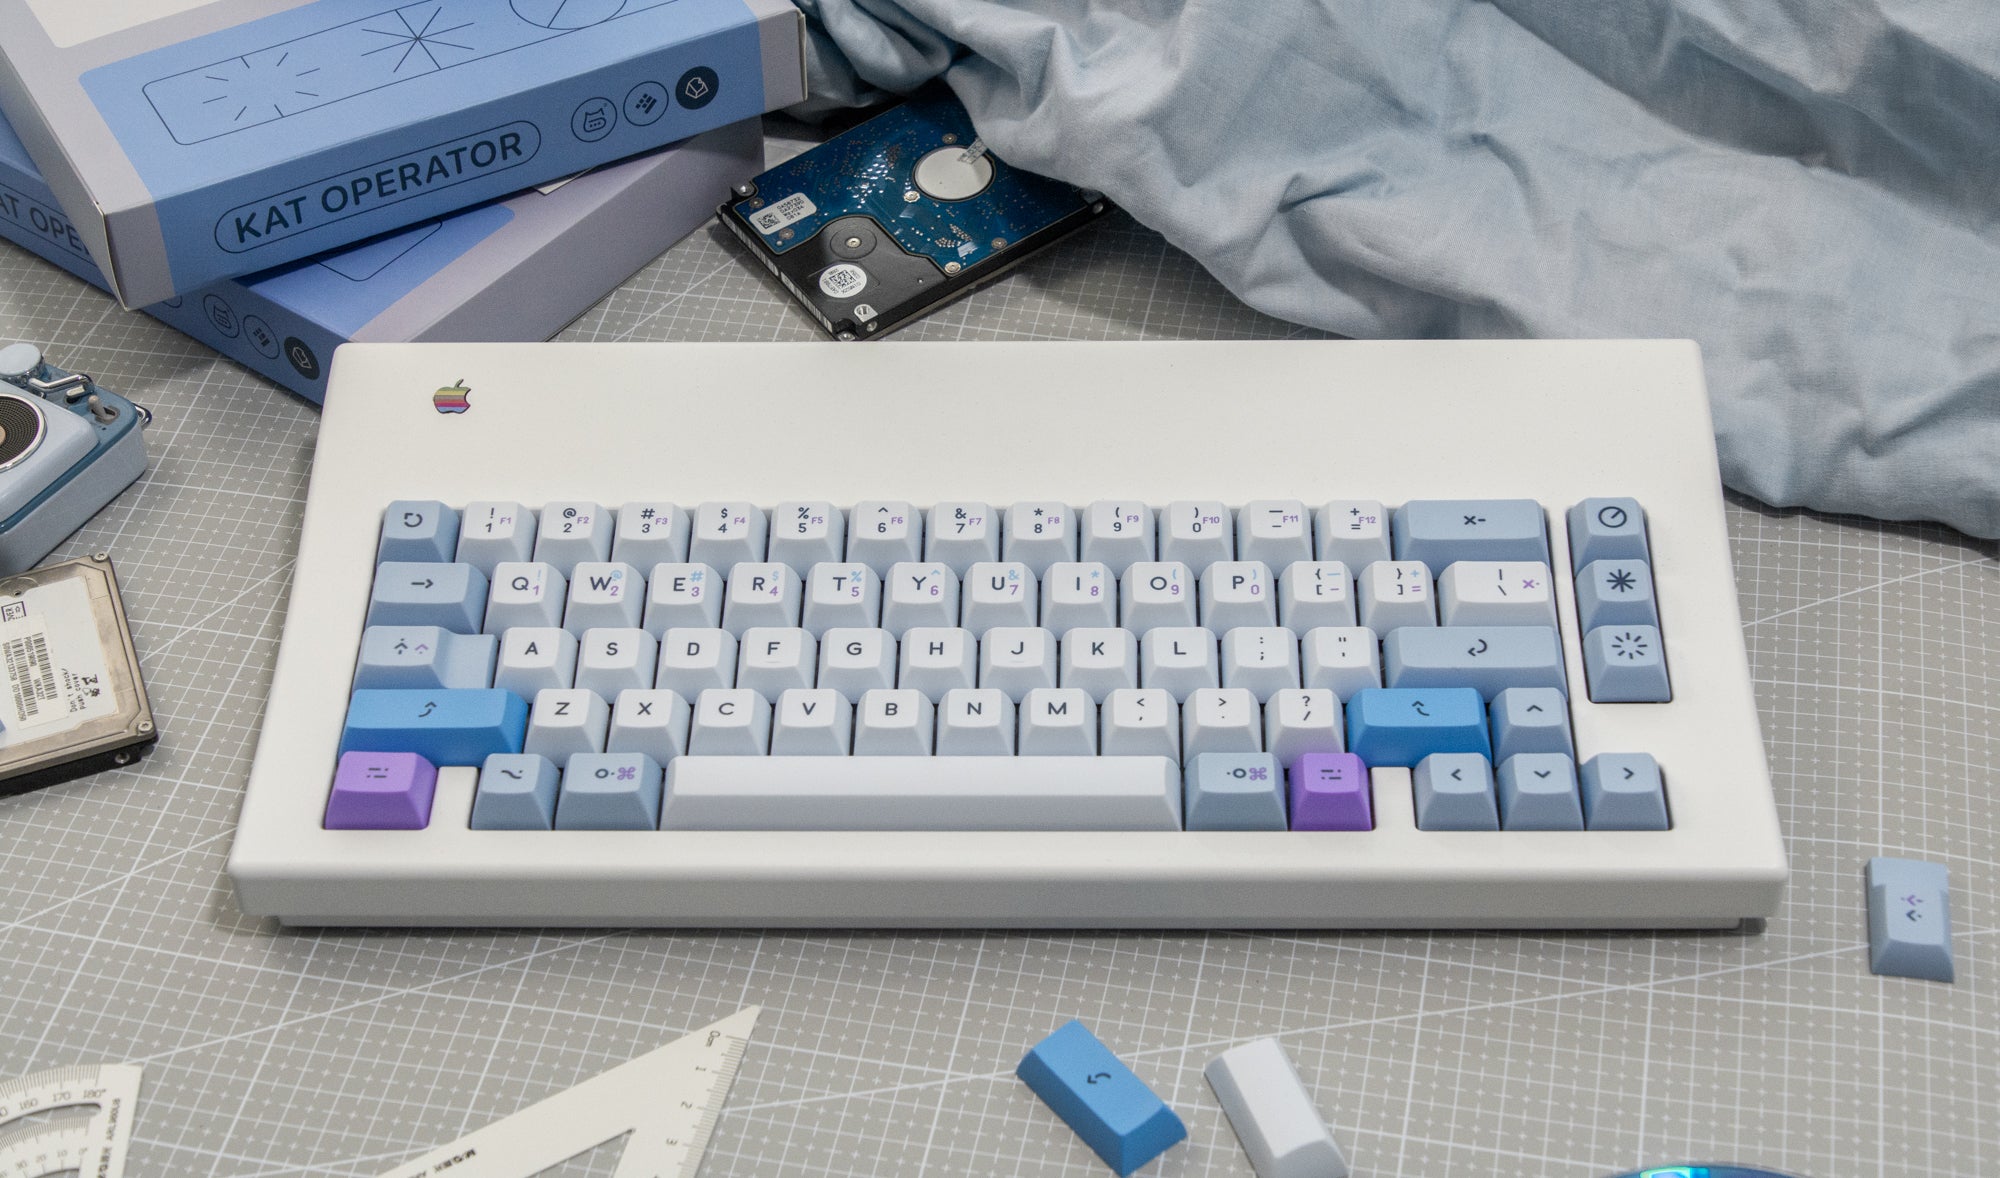 KAT Operator Thickened Double Shot PBT Keycaps Designed by Biip